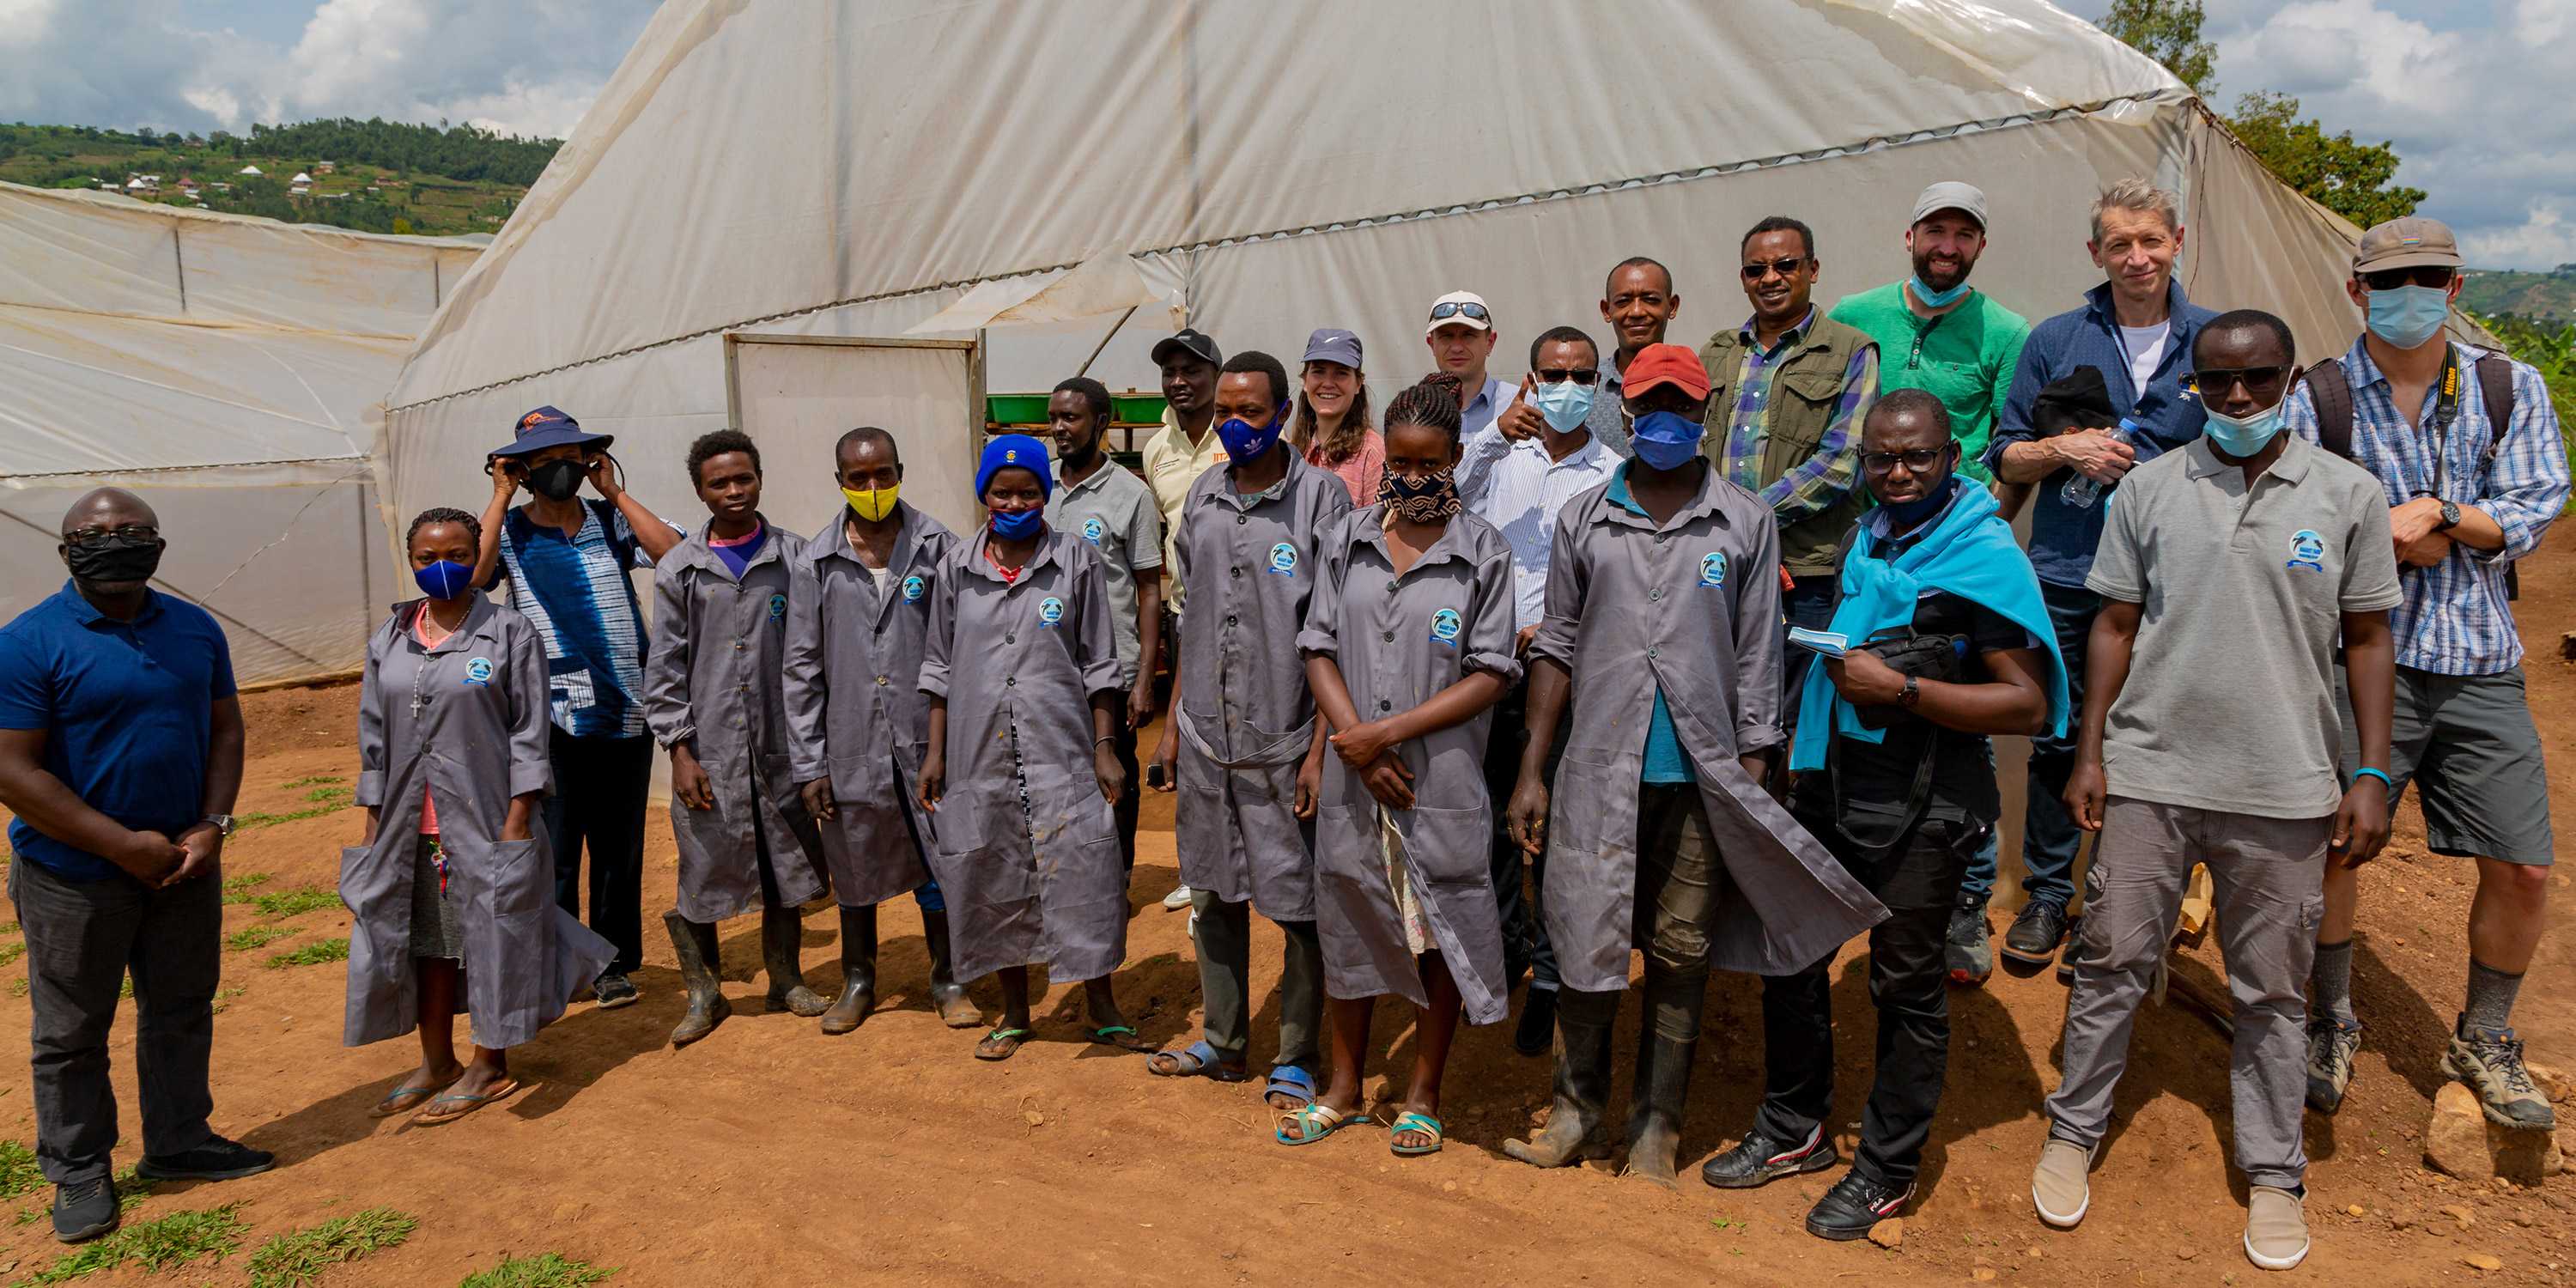 Group photo Runres team in Rwanda in front of a white tent